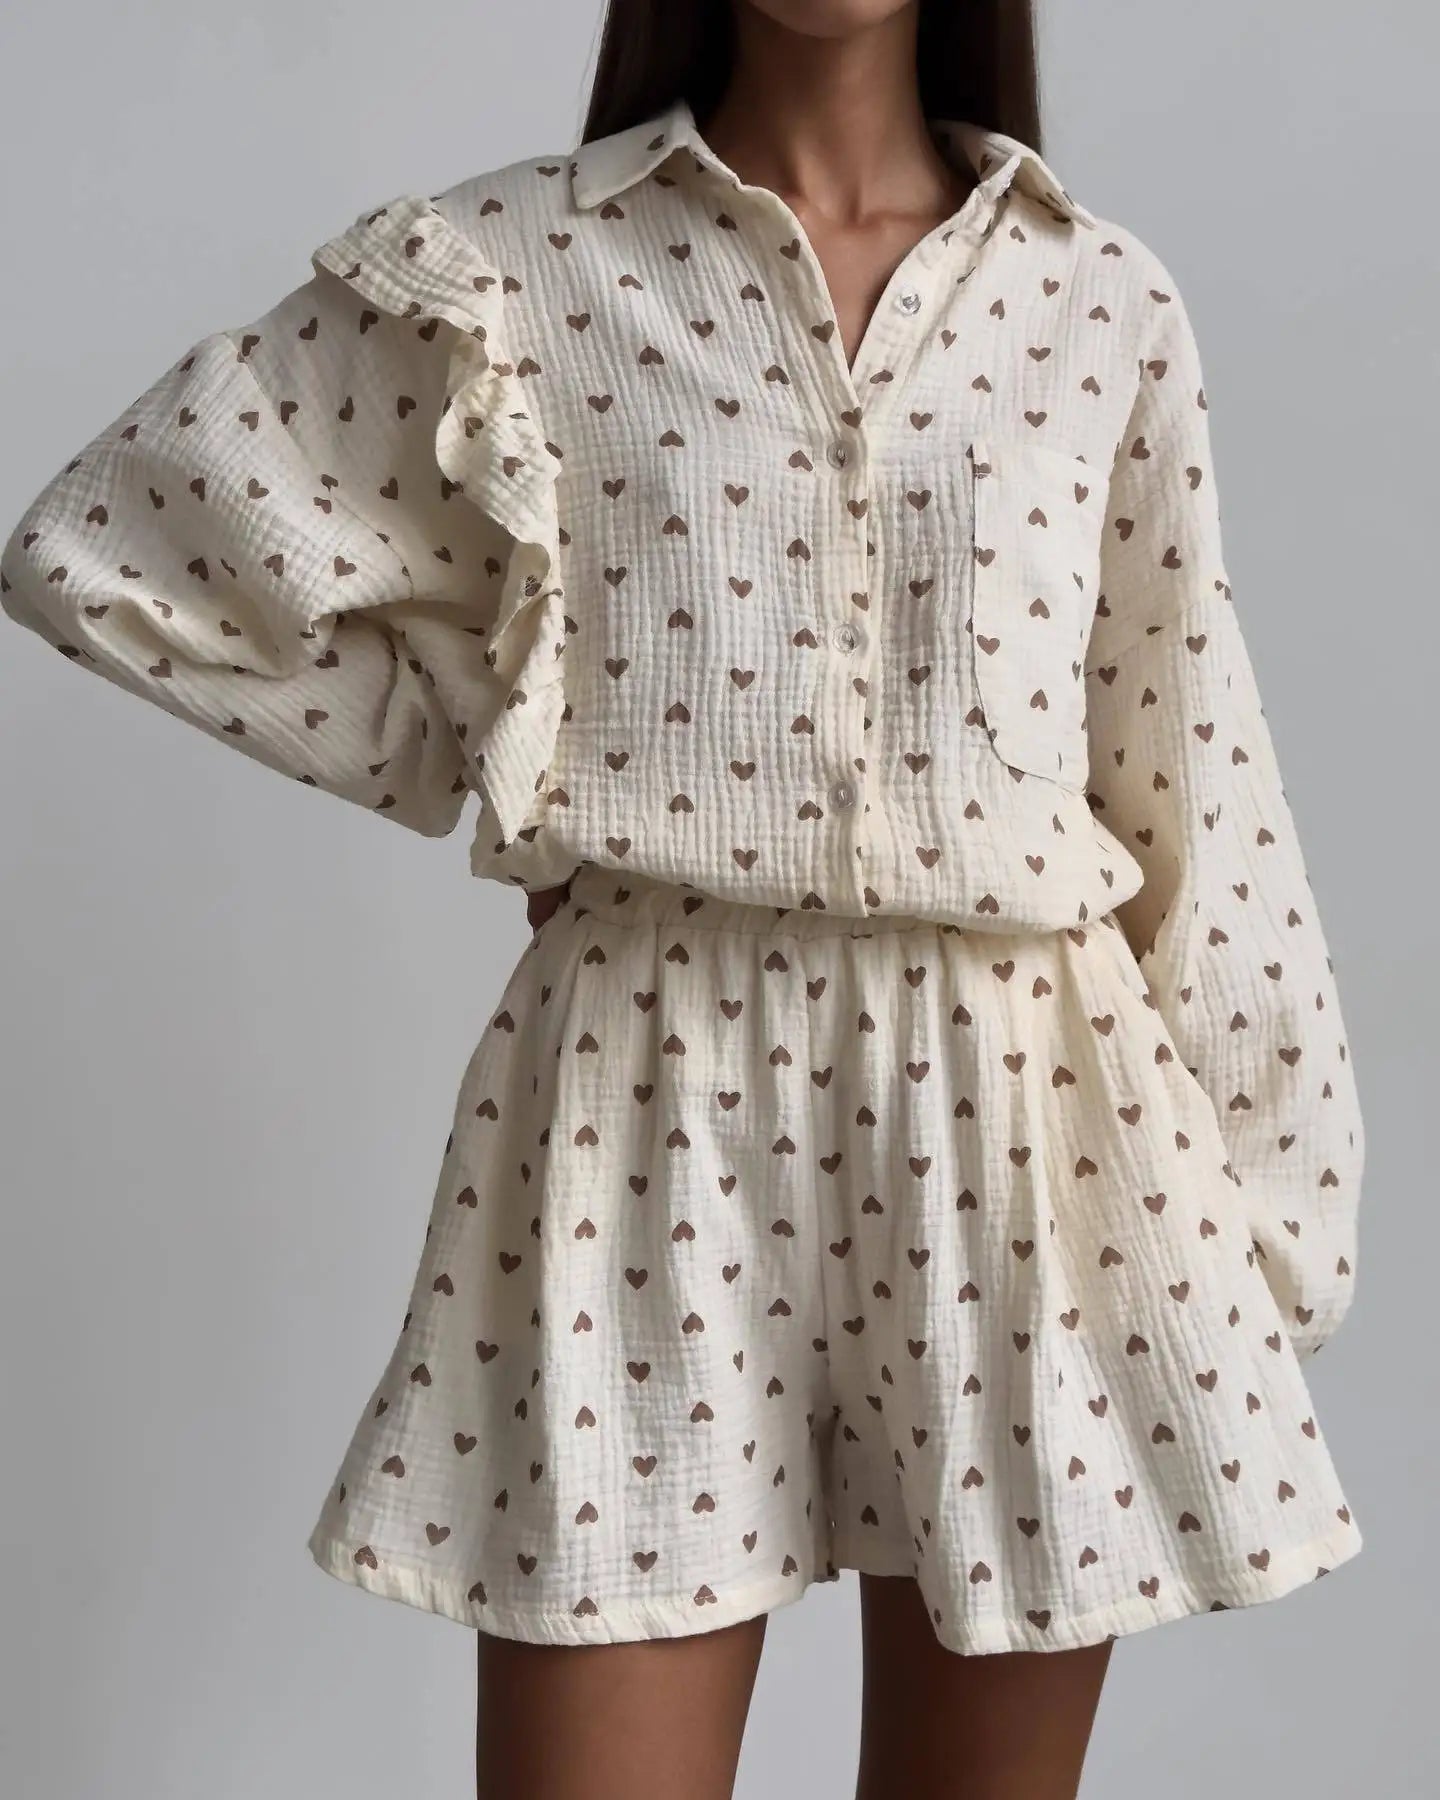 “Binded Lovers” Women’s Casual Long Sleeve 2 Piece Linen Outfit Set